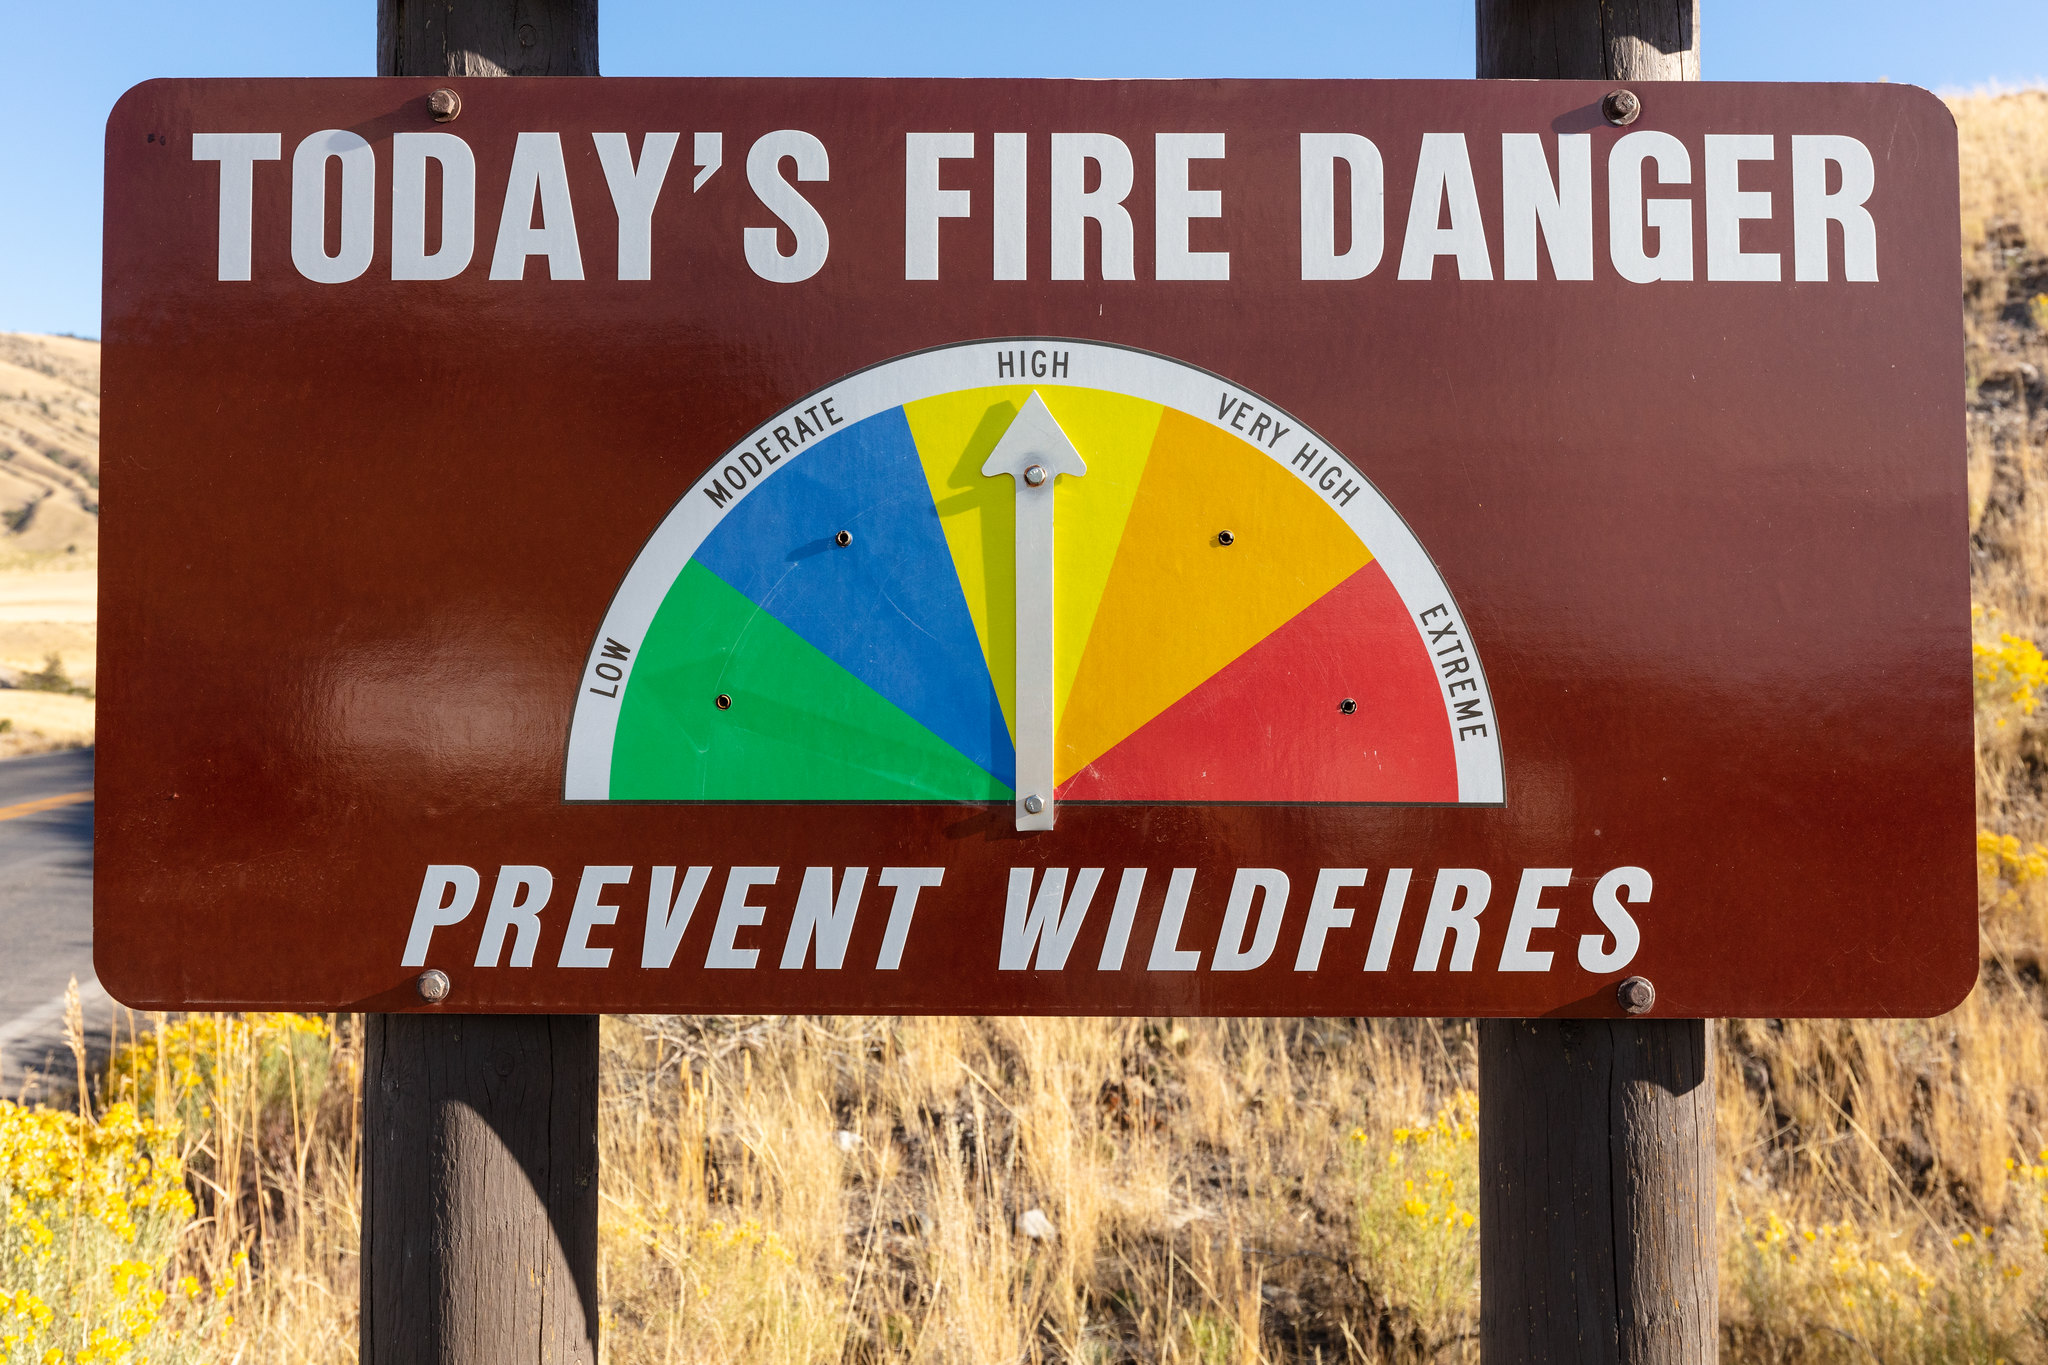 Image of sign showing fire danger is high